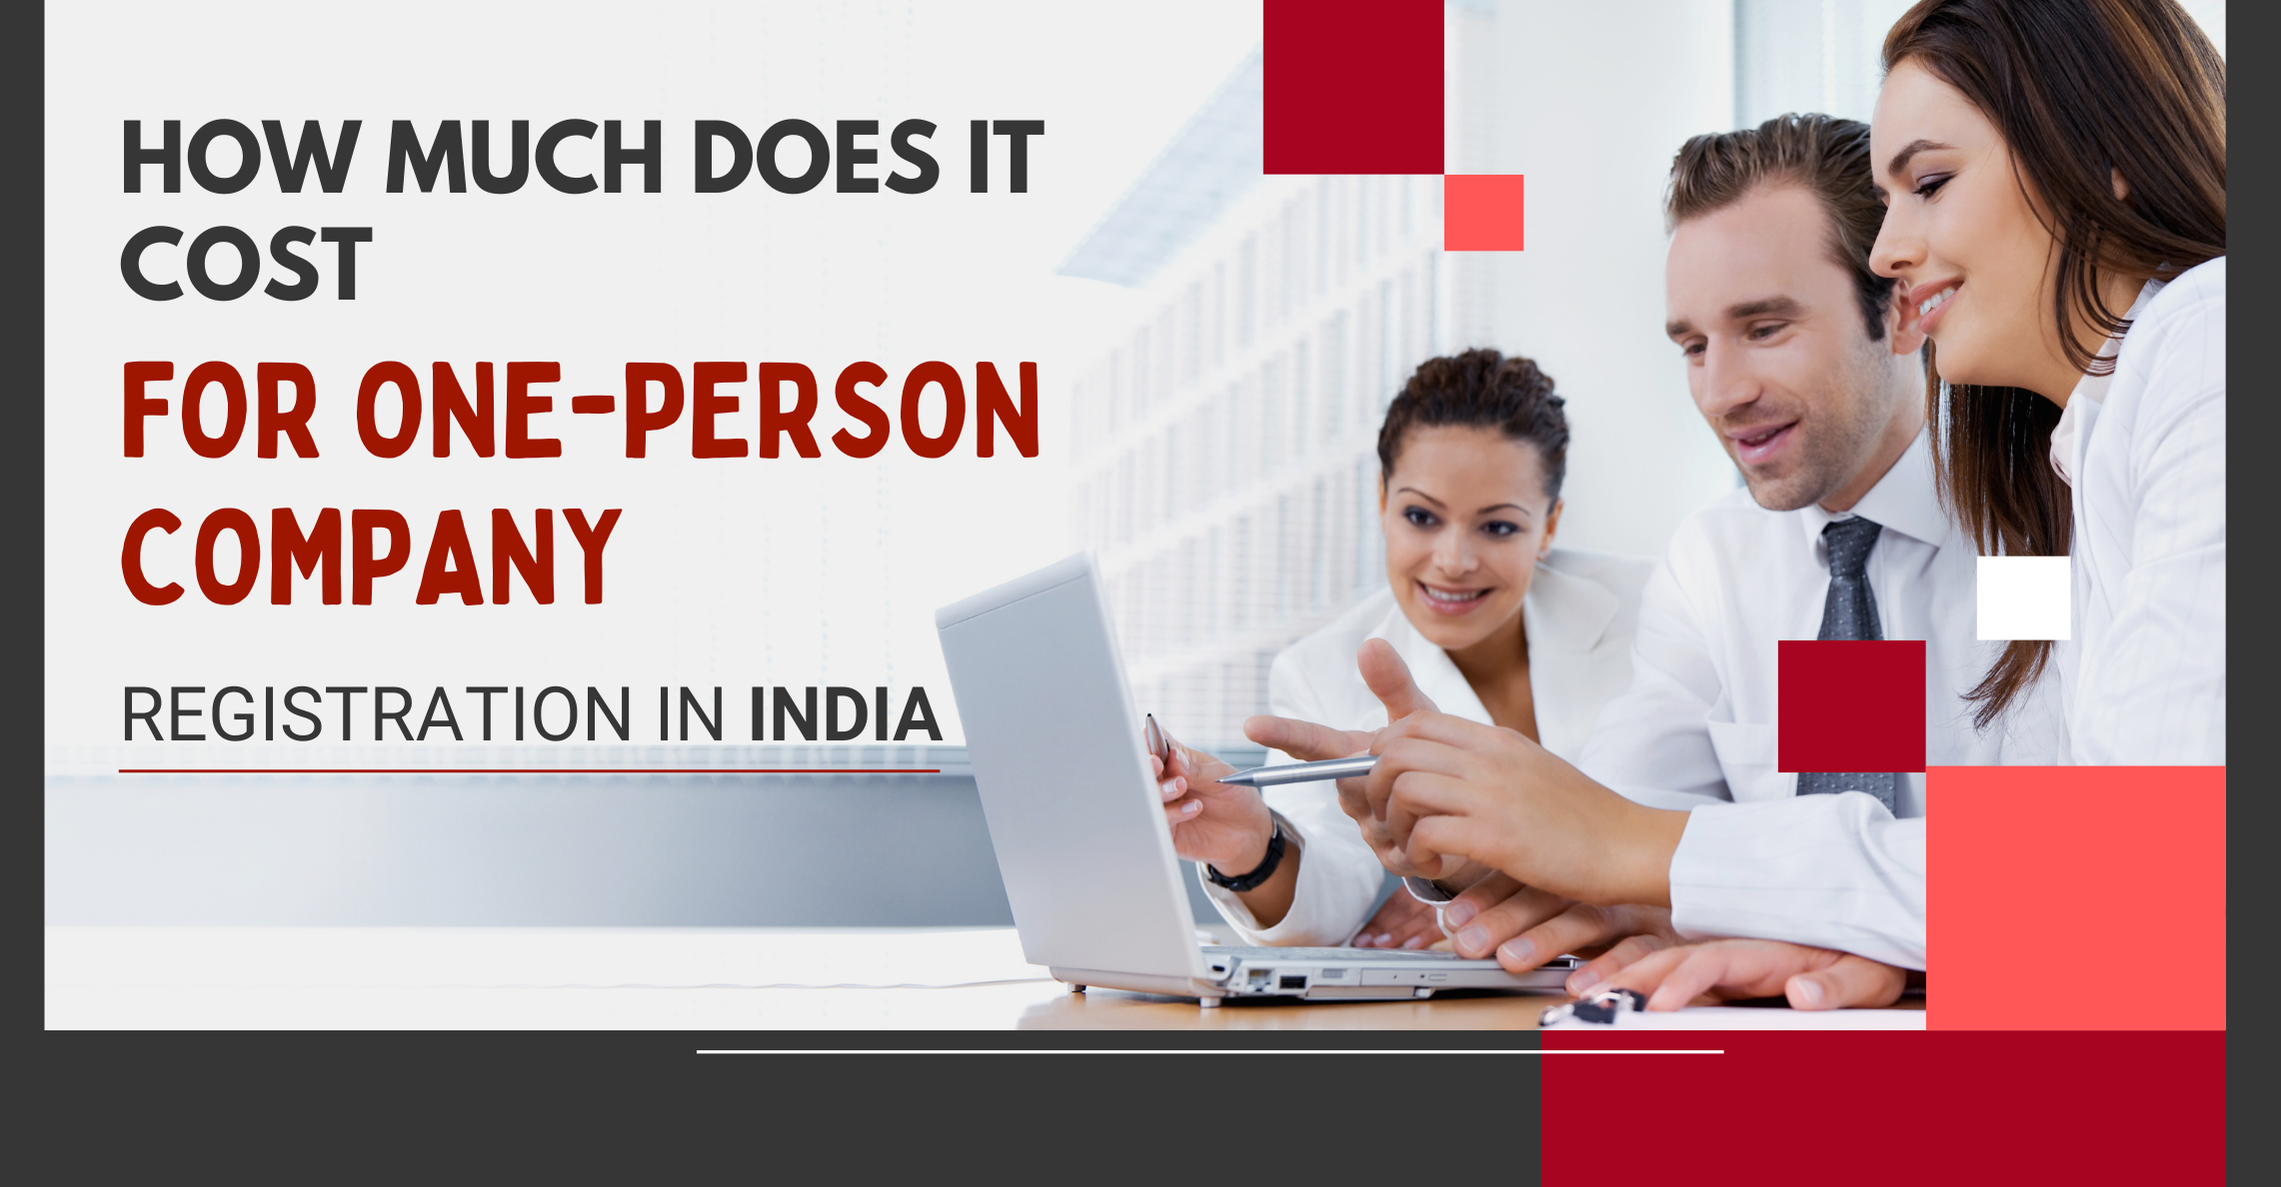 How Much Does it Cost for One-Person Company Registration in India?